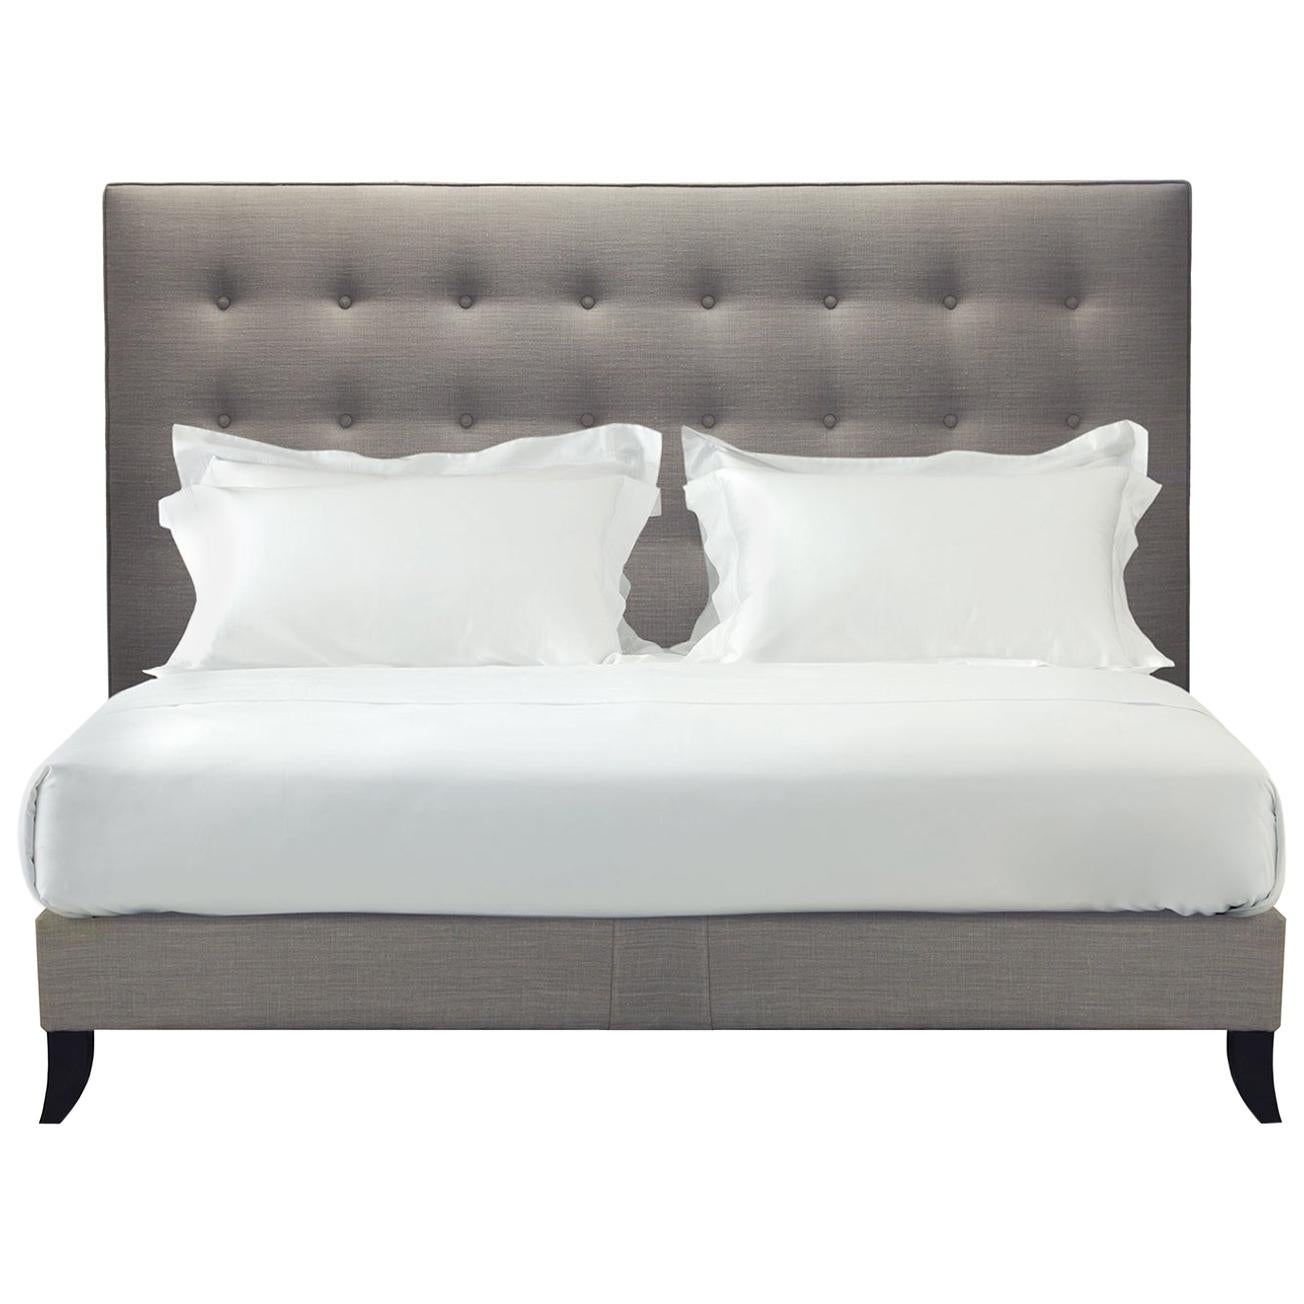 Bespoke Savoir Holly Headboard and Nº3 Bed Set, California King Size For Sale